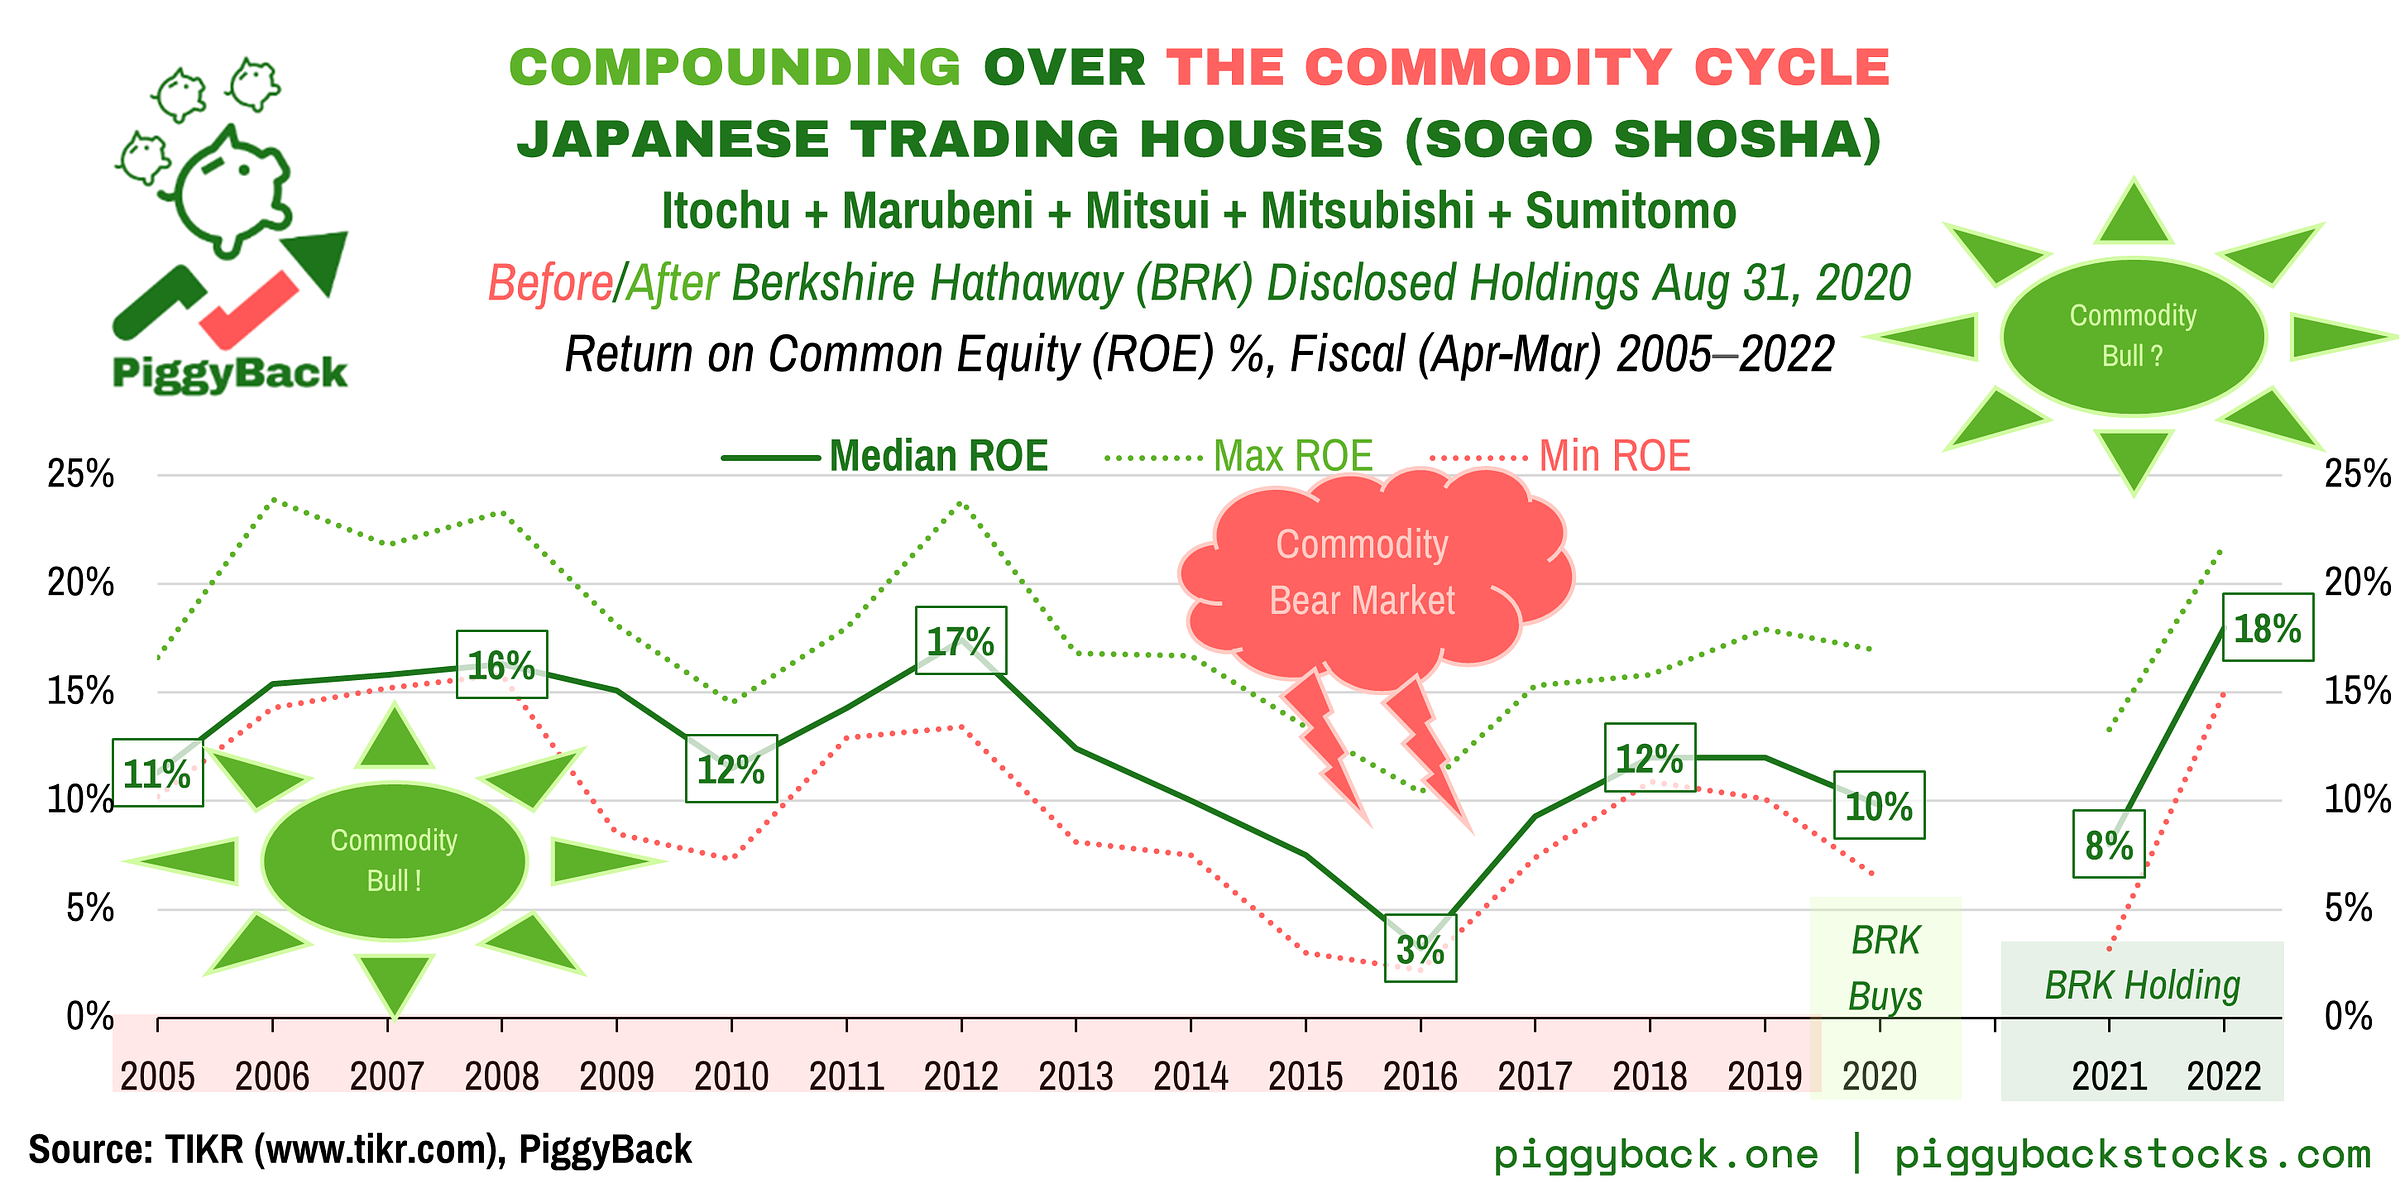 Chart 3: Return on Common Equity (ROE) for 5 Japanese trading house stocks for the fiscal reporting years 2005-2020 (April-March), right before Berkshire Hathaway disclosed holdings in all five stocks on August 31, 2020. The chart suggests that the trading houses returns on equity rises and falls with the commodity cycle. Source: TIKR, Analysis: PiggyBack